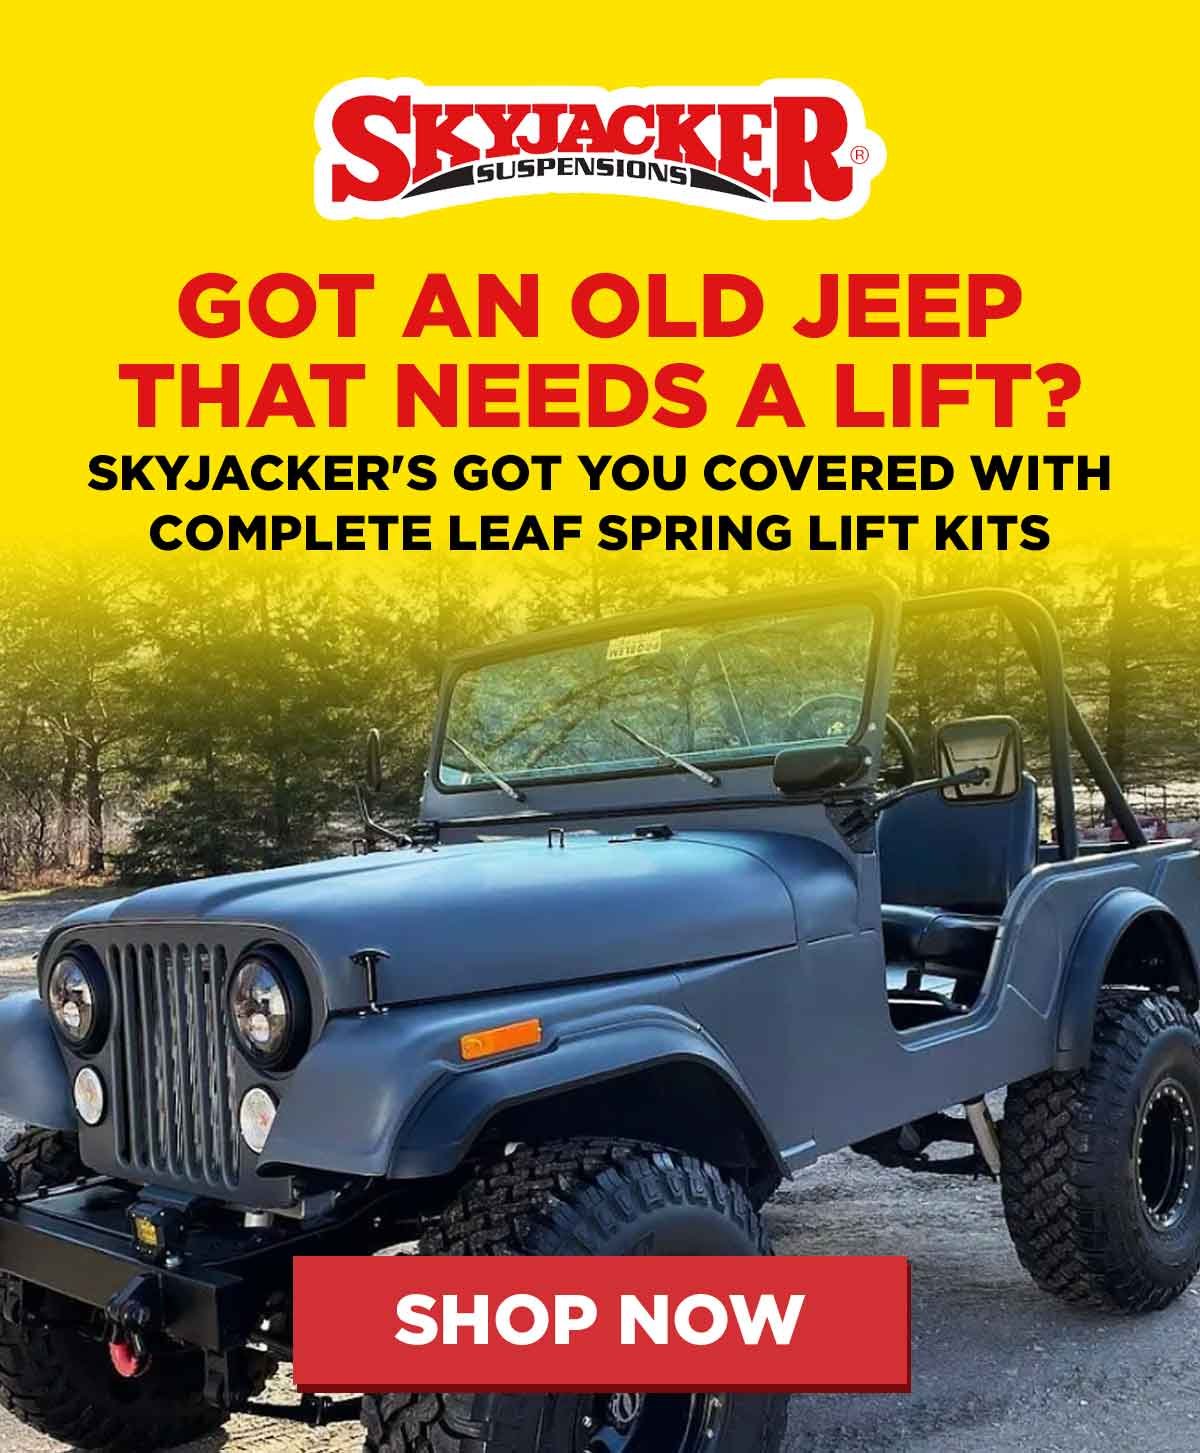 Got An Old Jeep That Needs A lift? Skyjacker's Got You Covered With Complete Leaf Spring Lift Kits